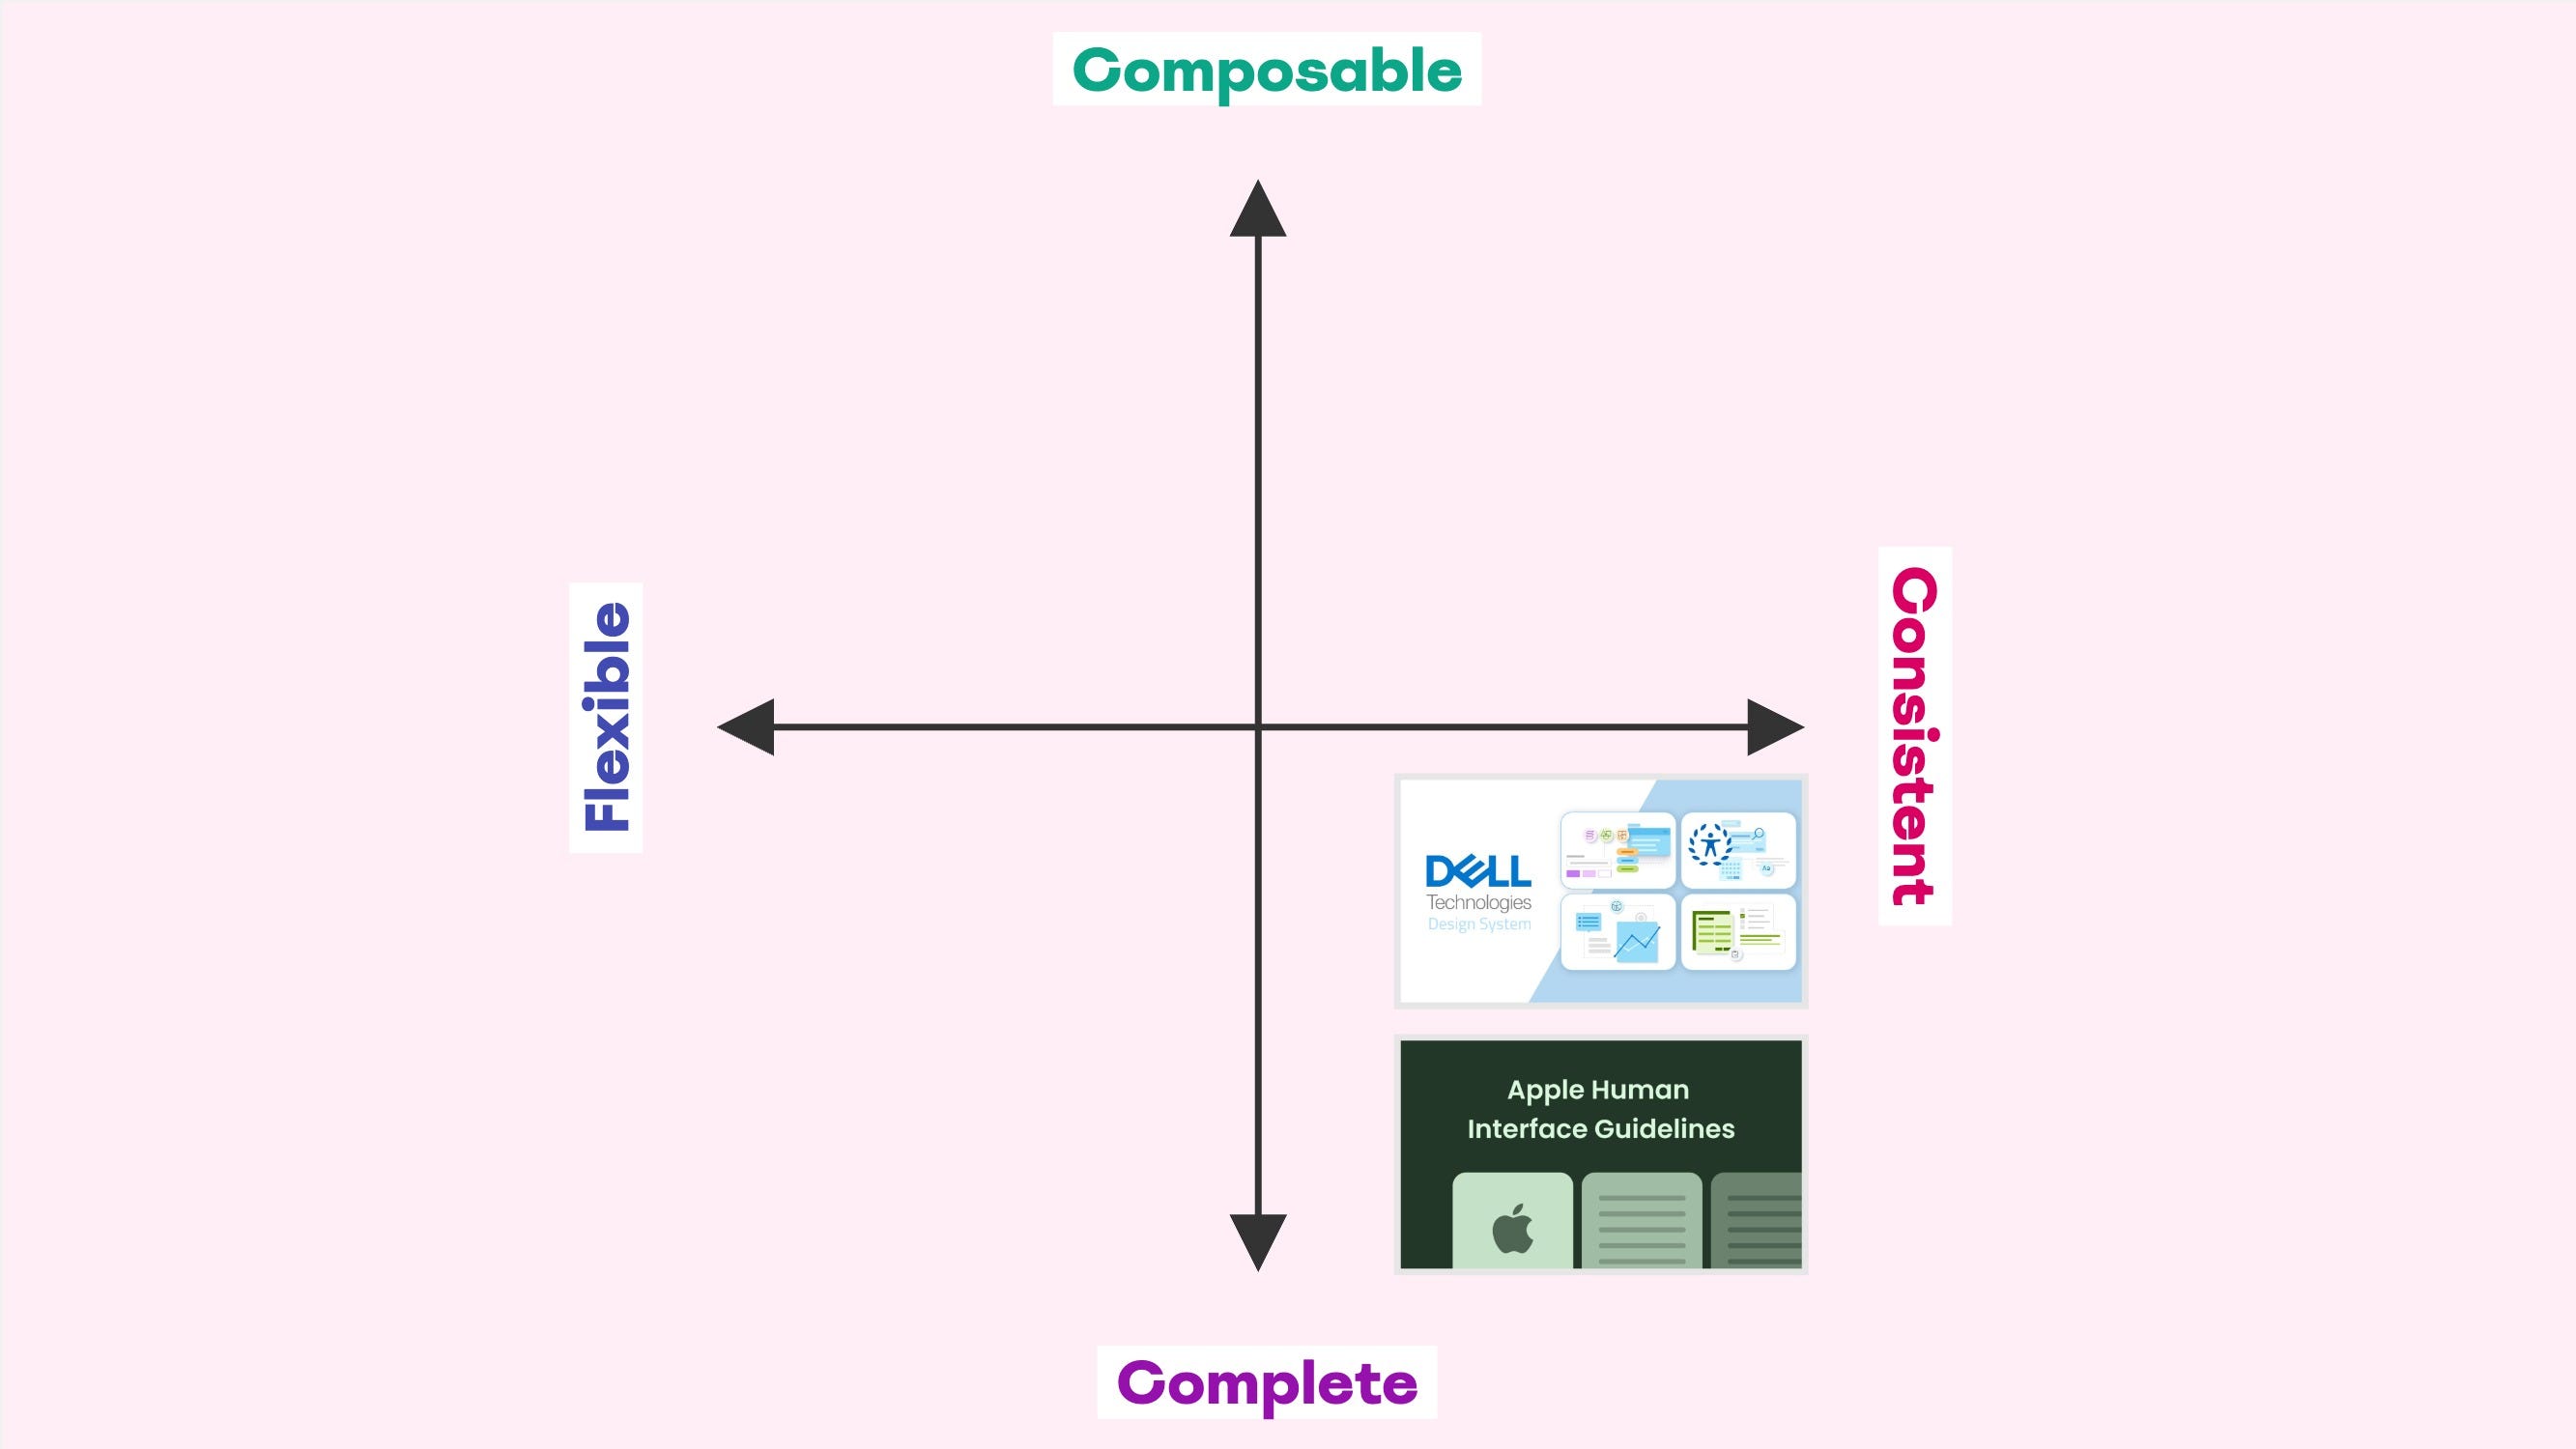 The two-dimensional graph with screenshots of Dell Design System and Apple’s Human Interface Guidelines in the bottom-right quadrant.